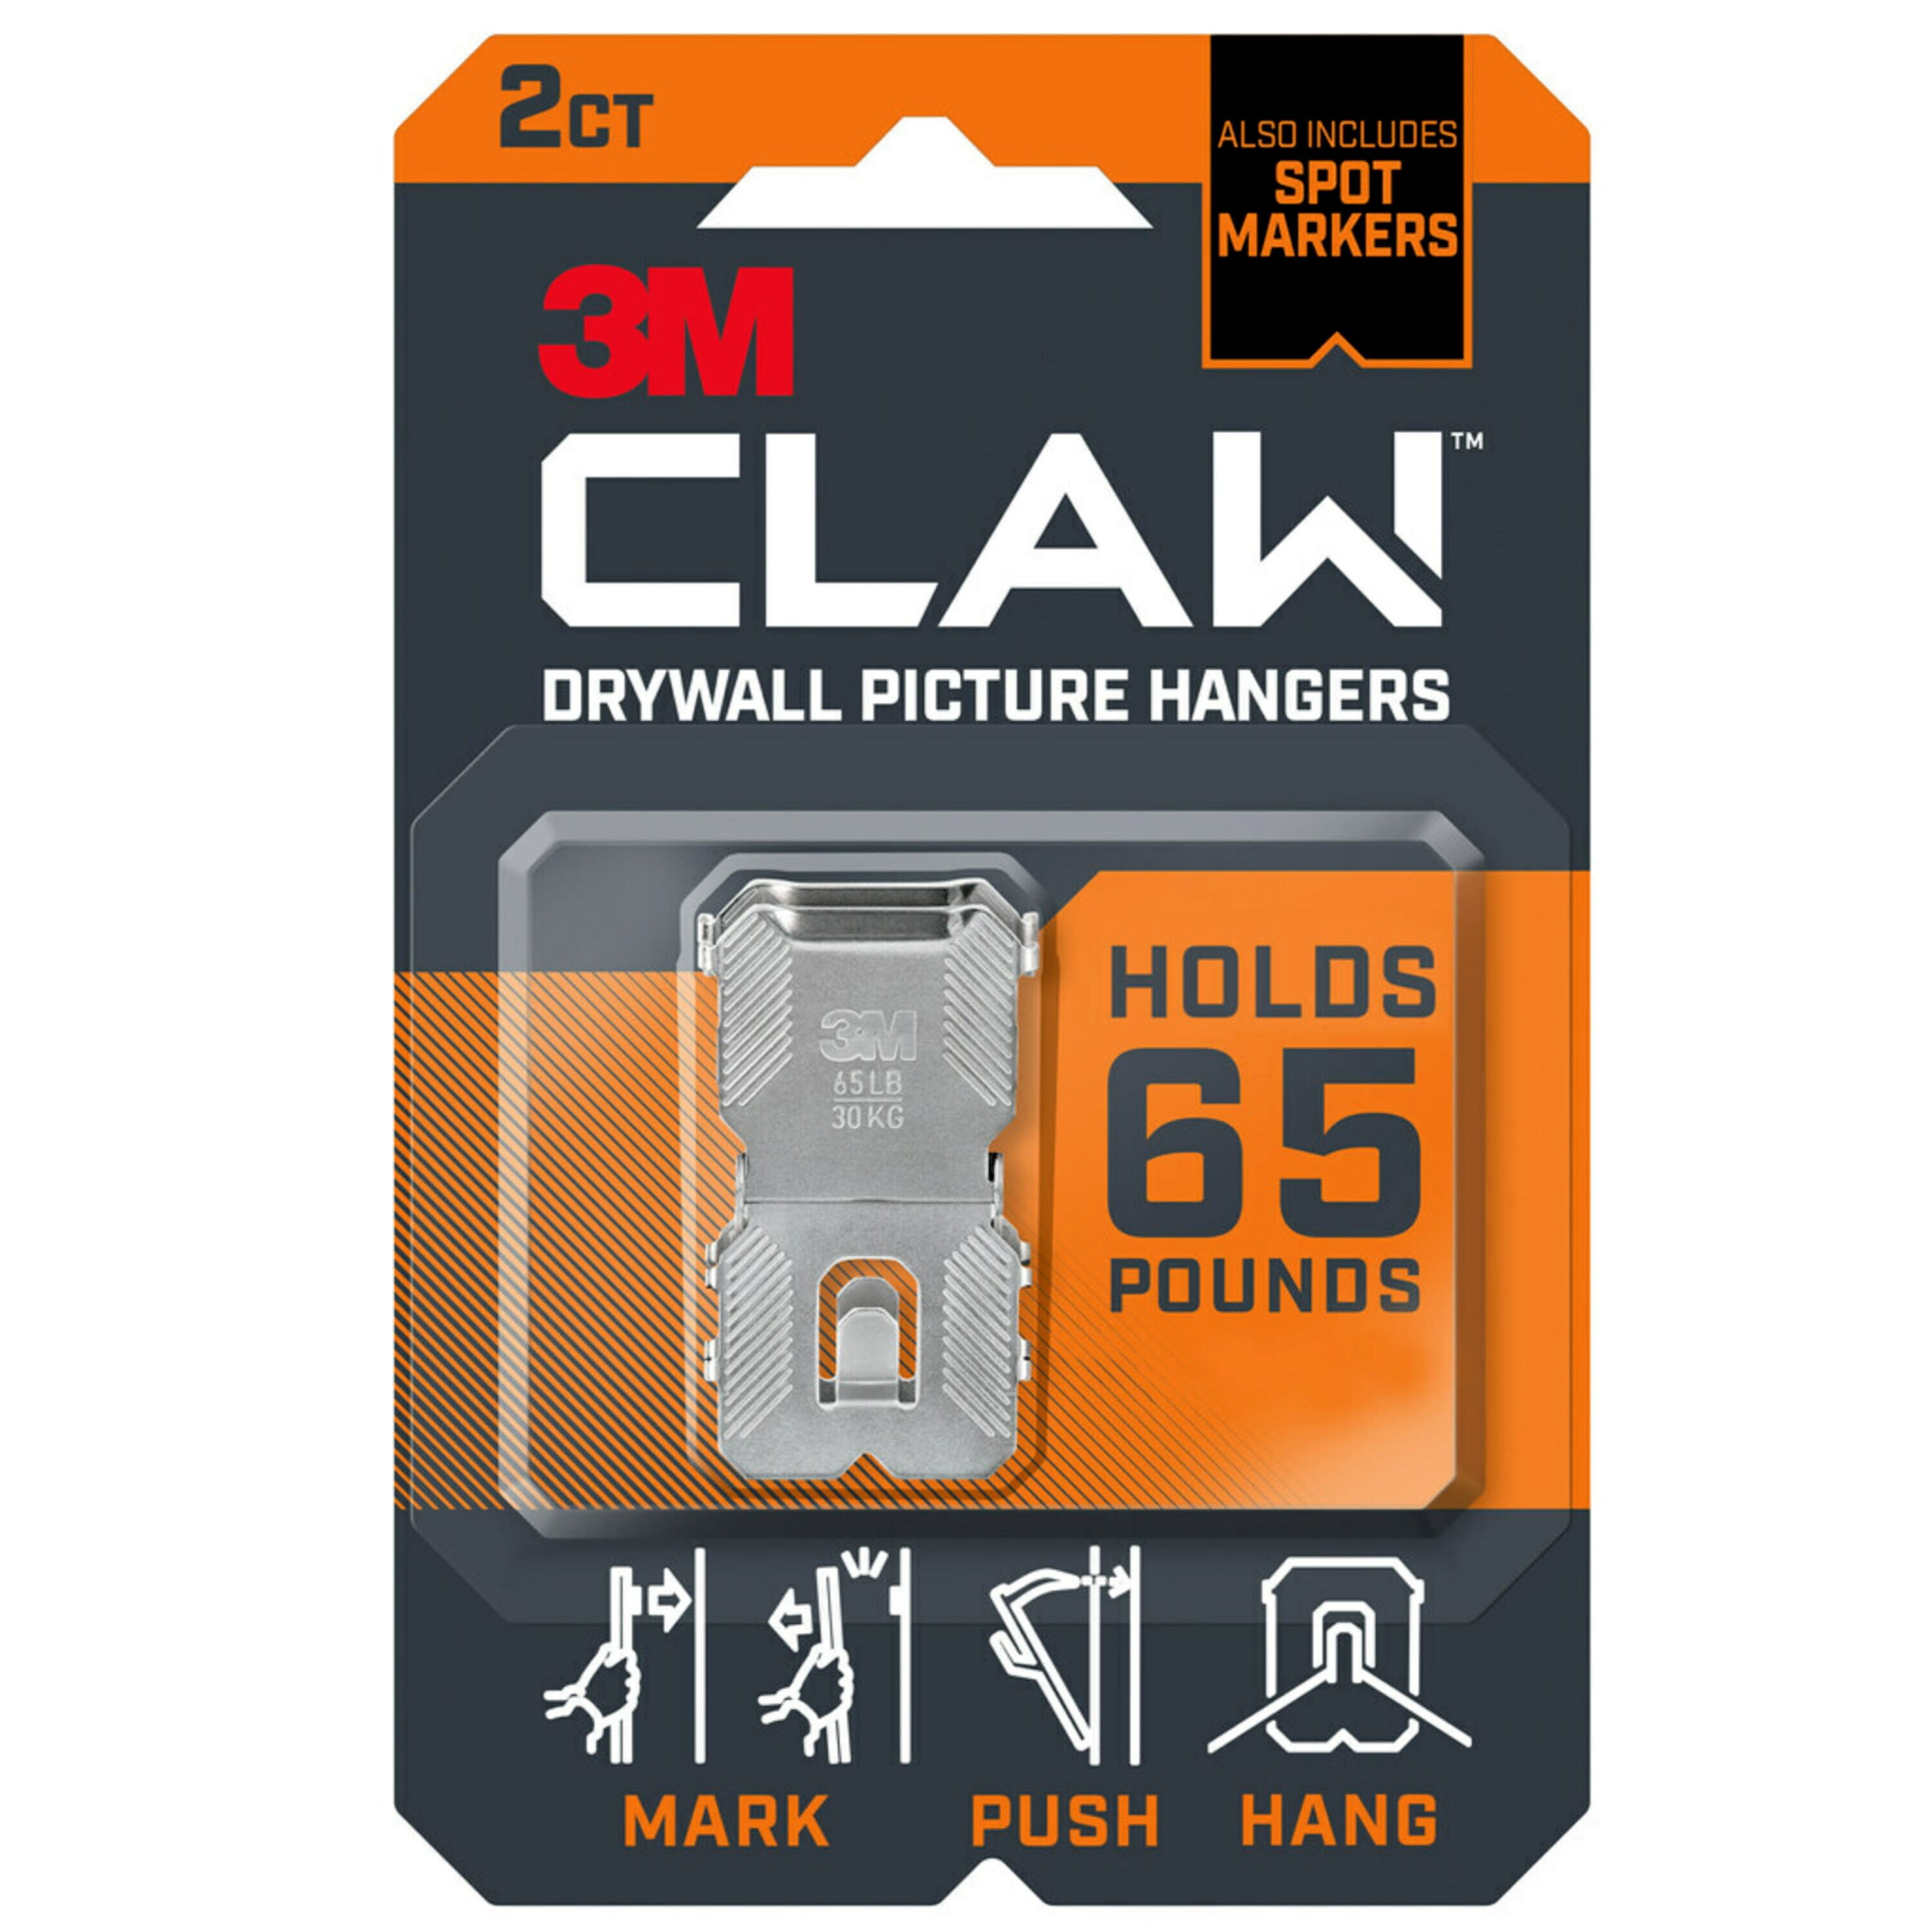 3M CLAW Drywall Picture Hanger with Temporary Spot Marker, Holds 65 lbs, 2  Hangers, 2 Markers